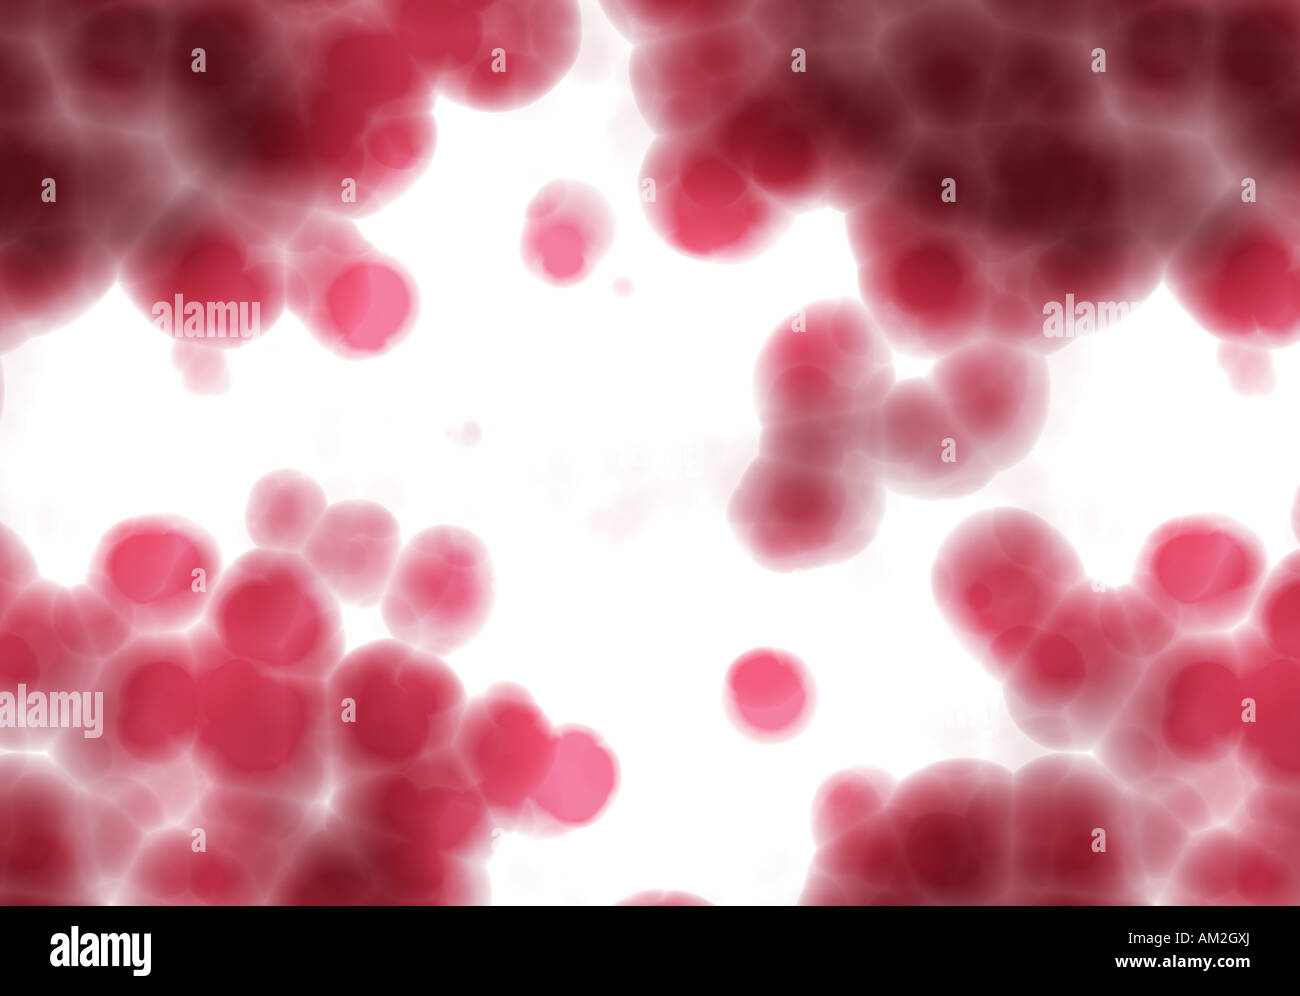 brightly backlit red cells on white background under the microscope Stock Photo